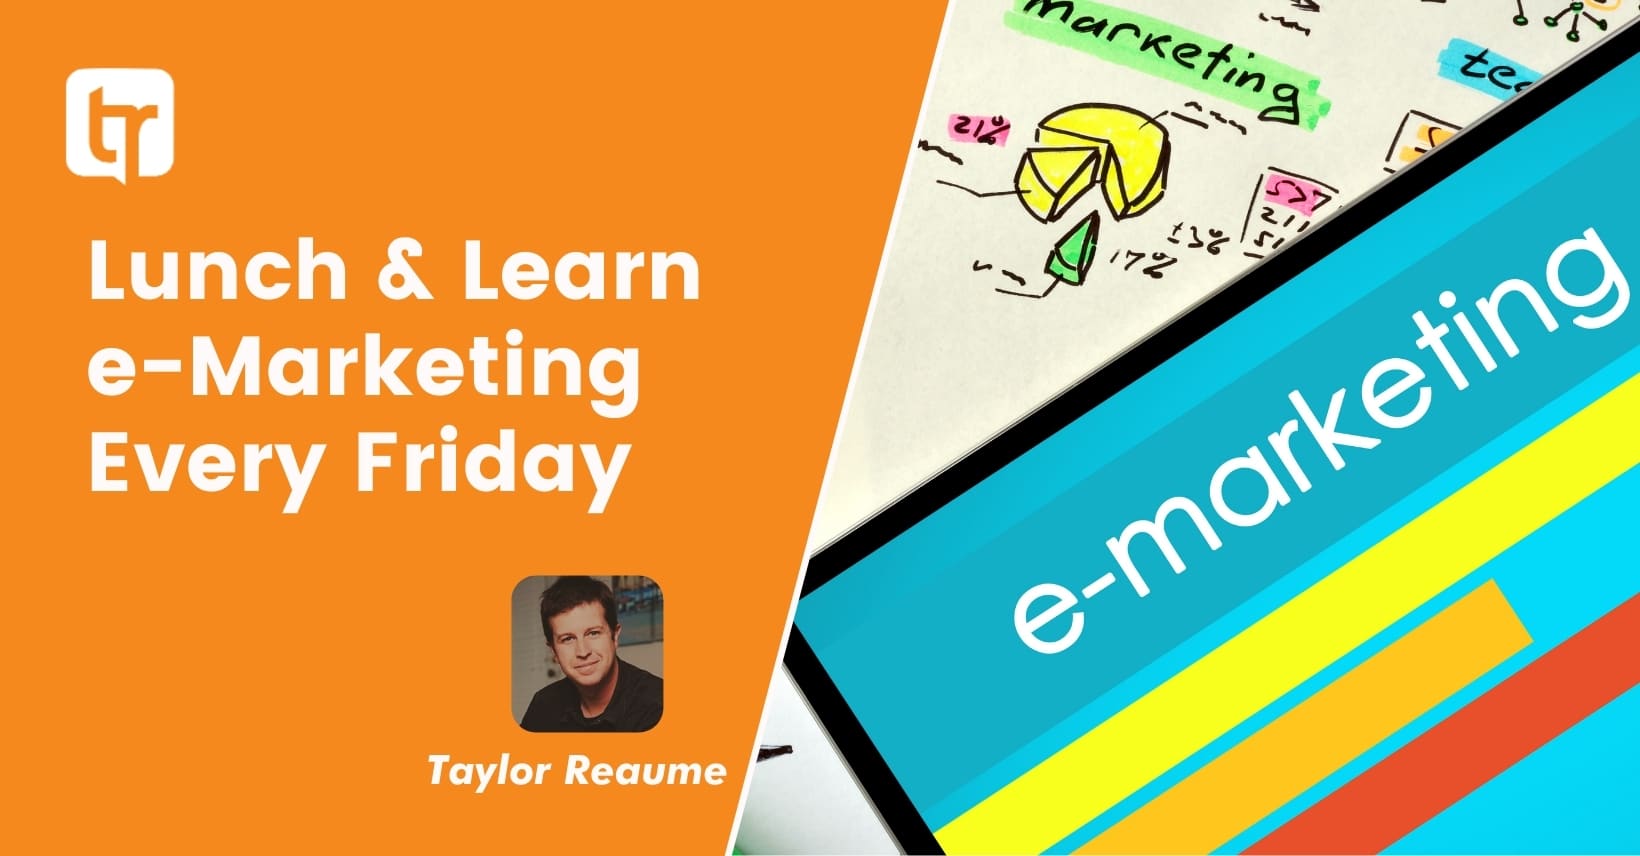 Lunch & Learn e-Marketing Every Friday